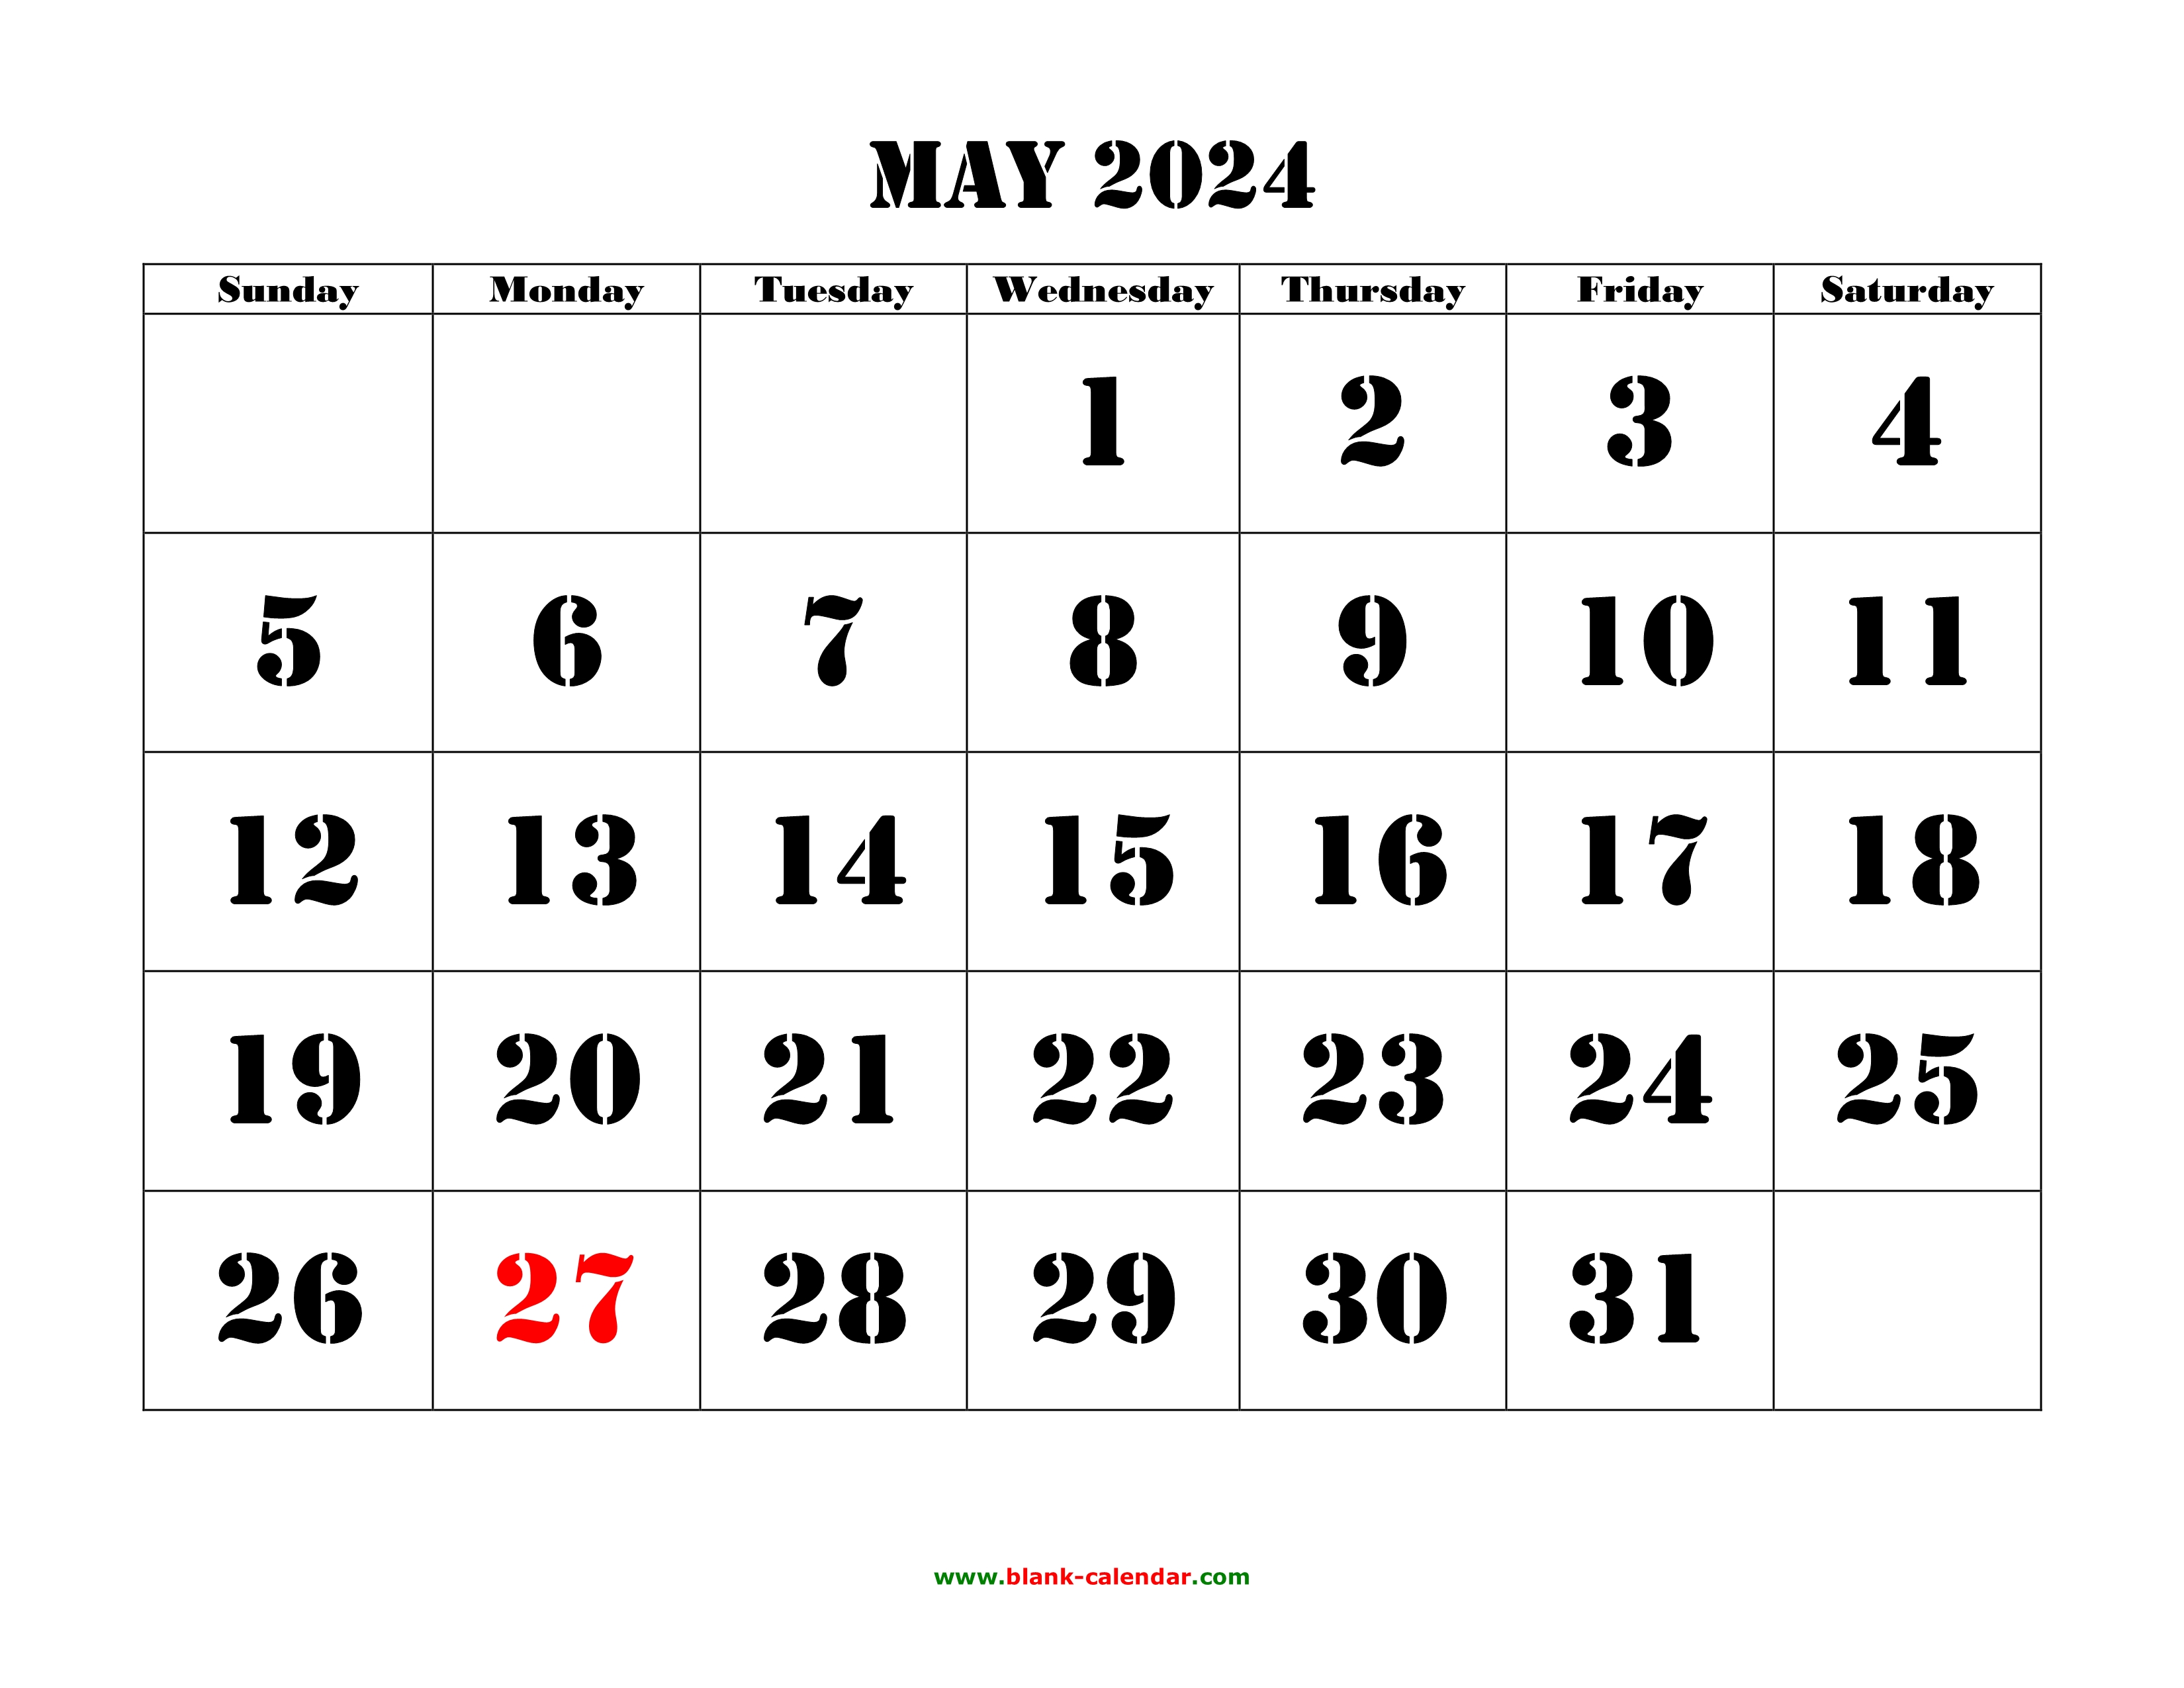 may-2024-printable-calendar-free-download-monthly-calendar-templates